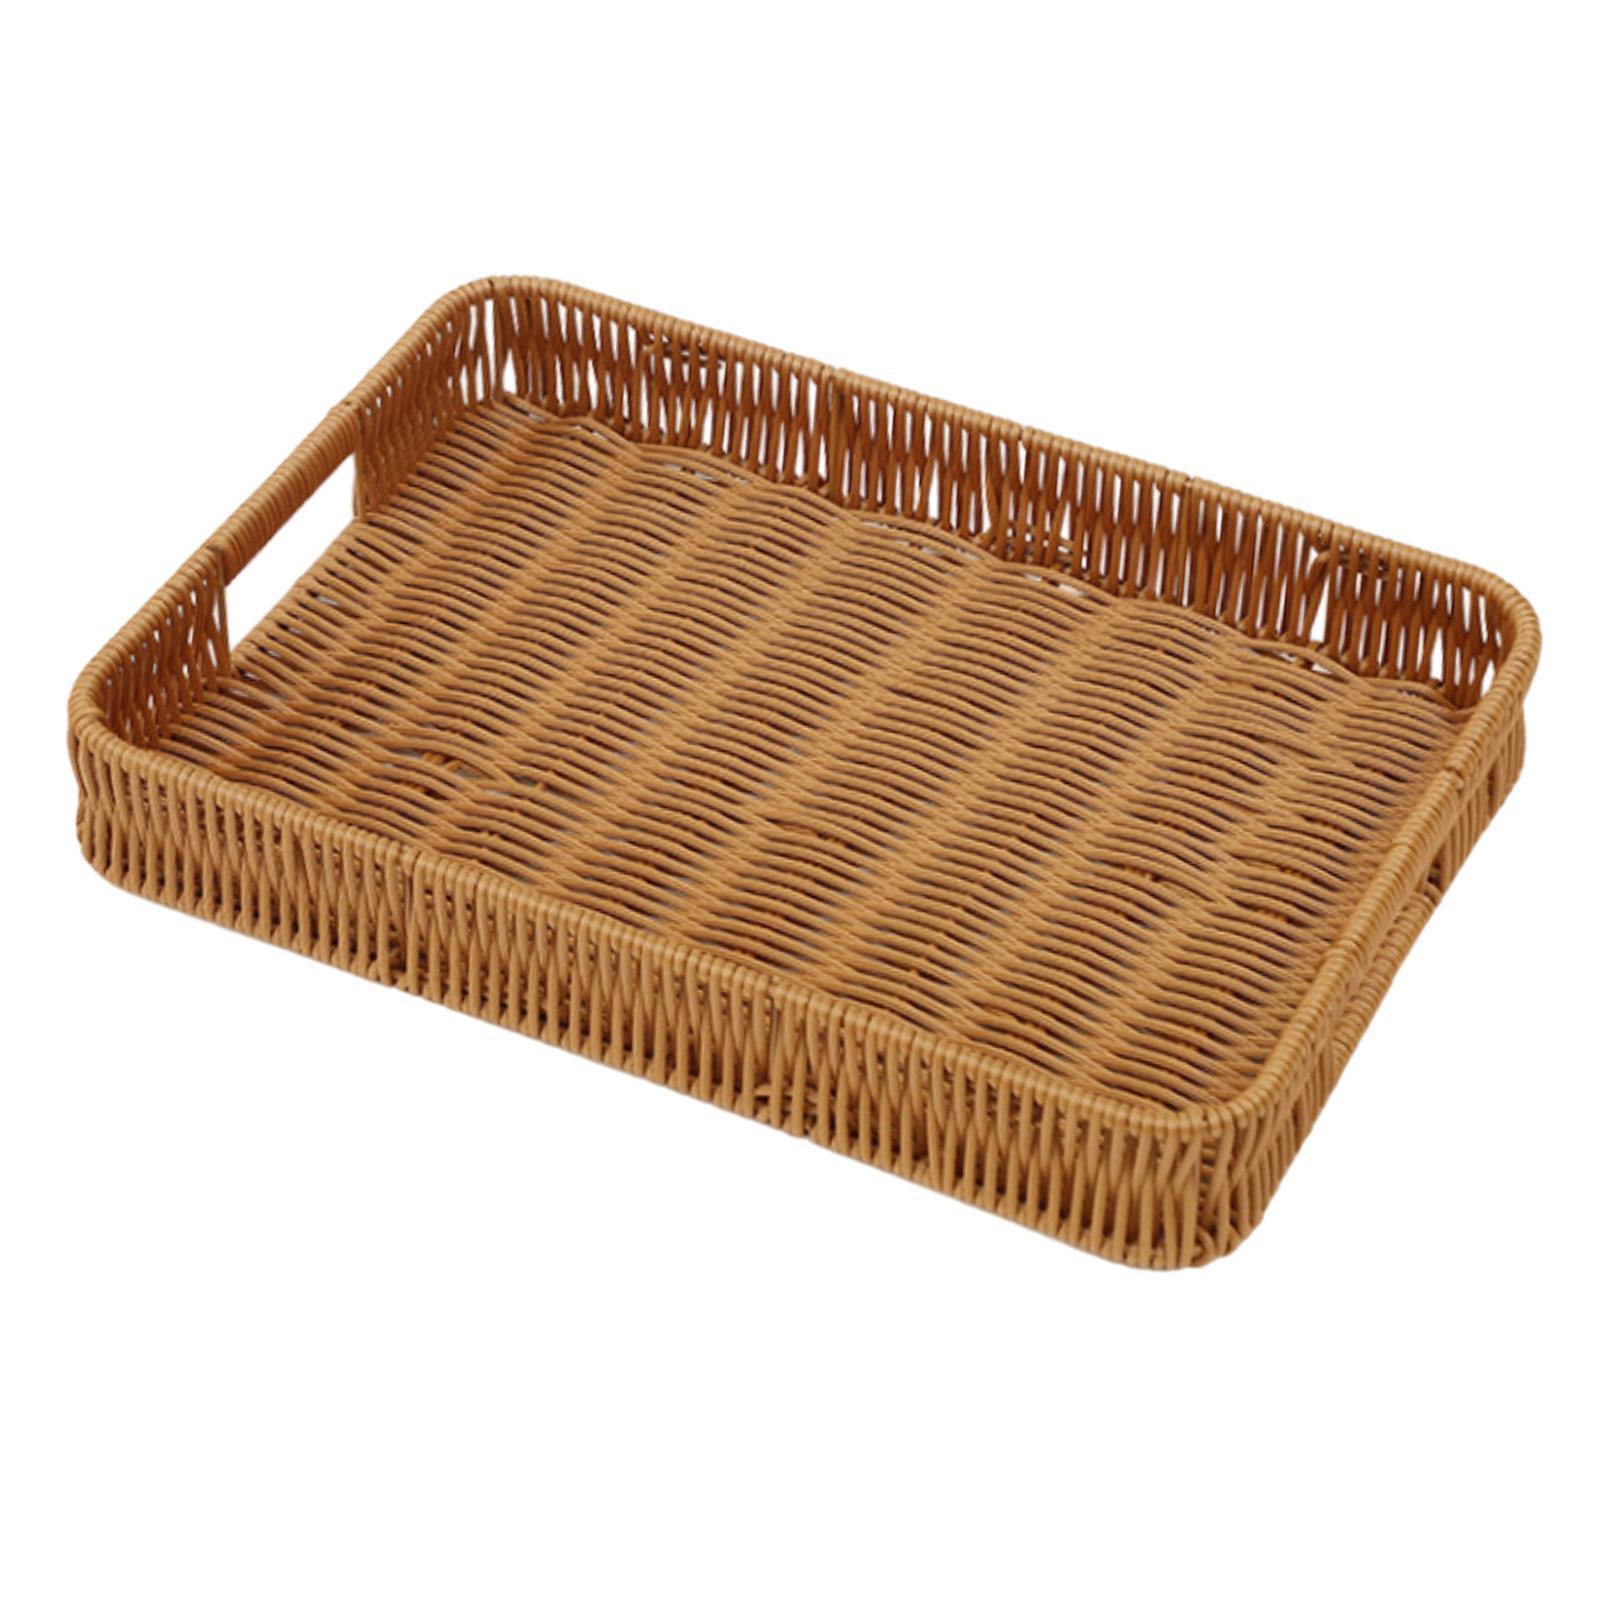 Hand Woven Fruit Serving Tray Decorative for Kitchen Wedding Gift ...